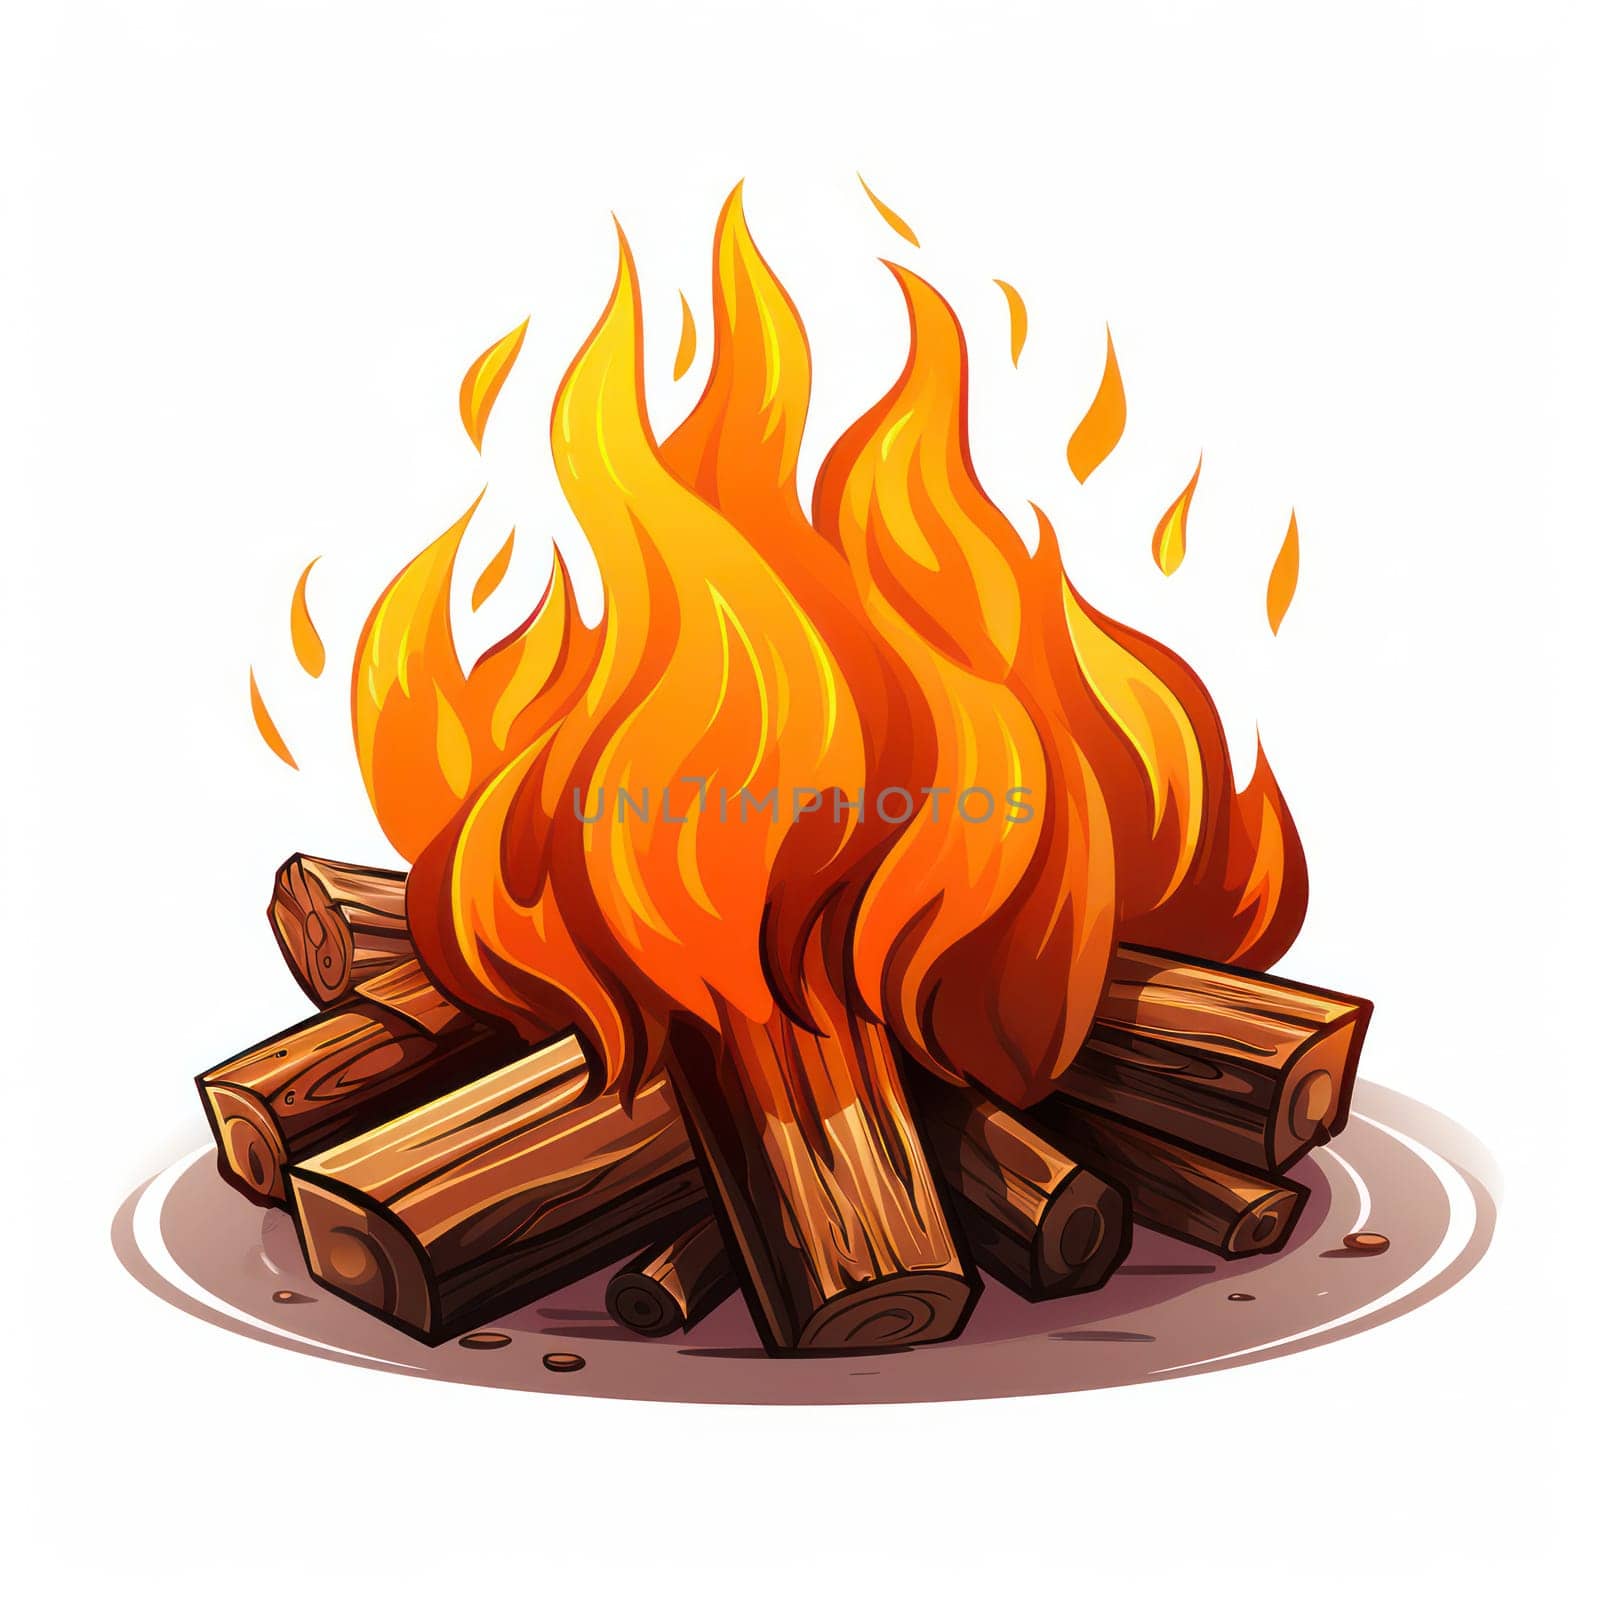 Bright Flames On Wood: A Cartoon Campfire Illustration with Warmth and Adventure under the Night Sky by Vichizh